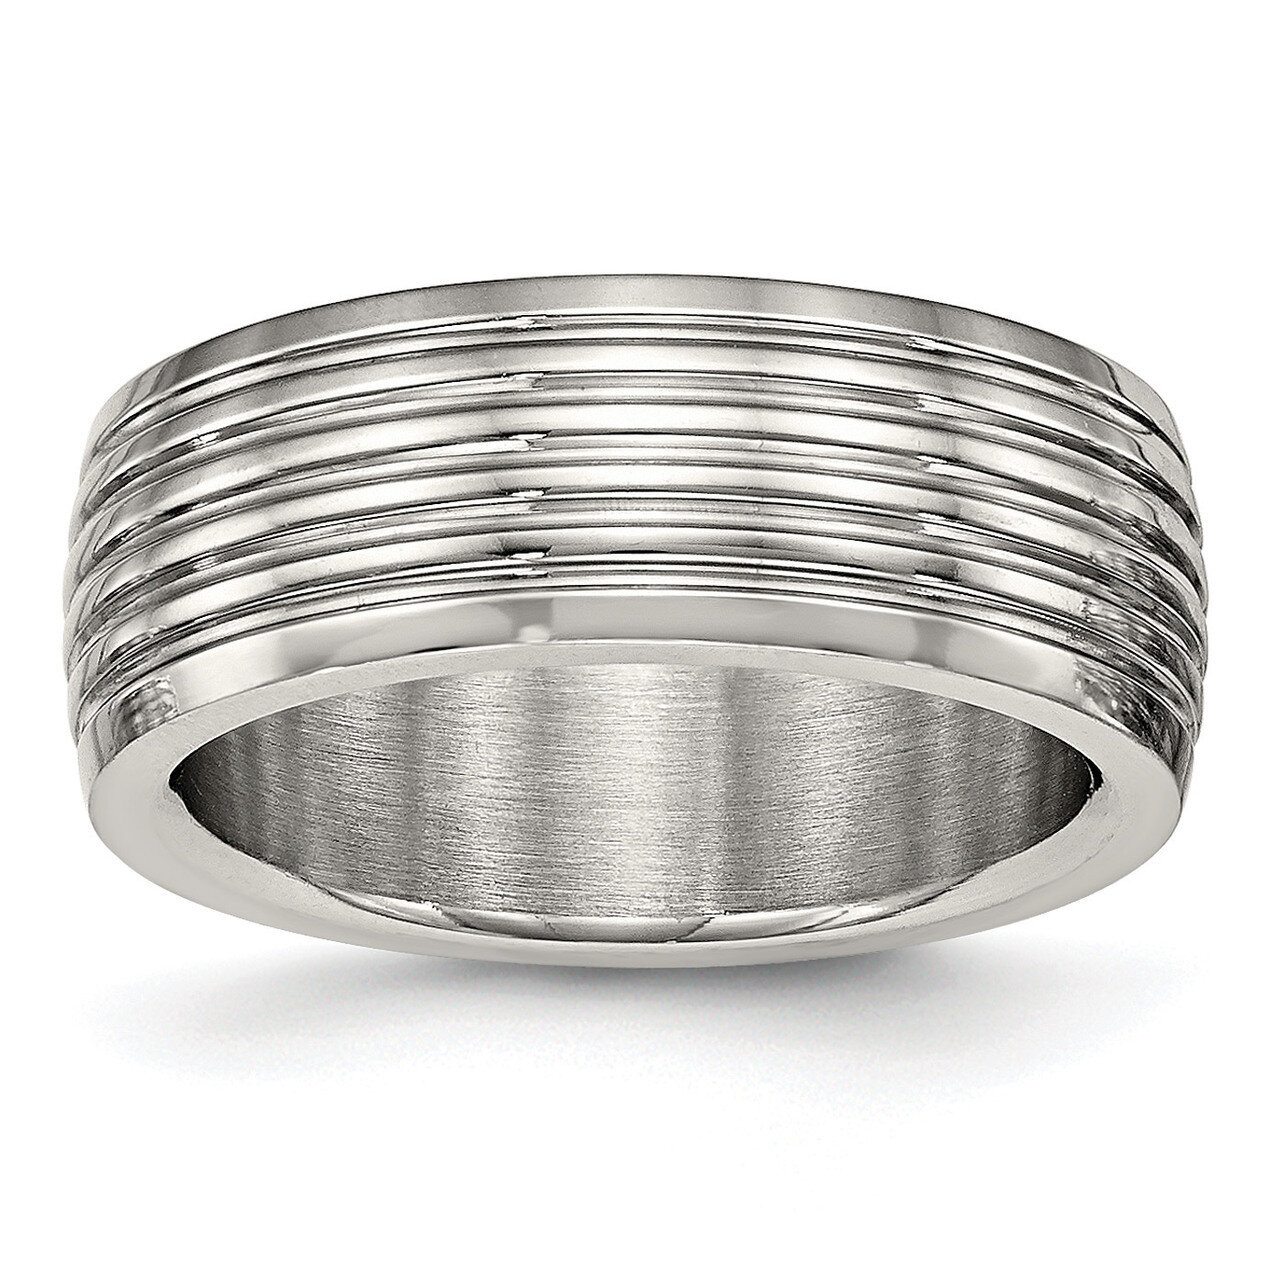 Grooved Ring Stainless Steel Polished SR581